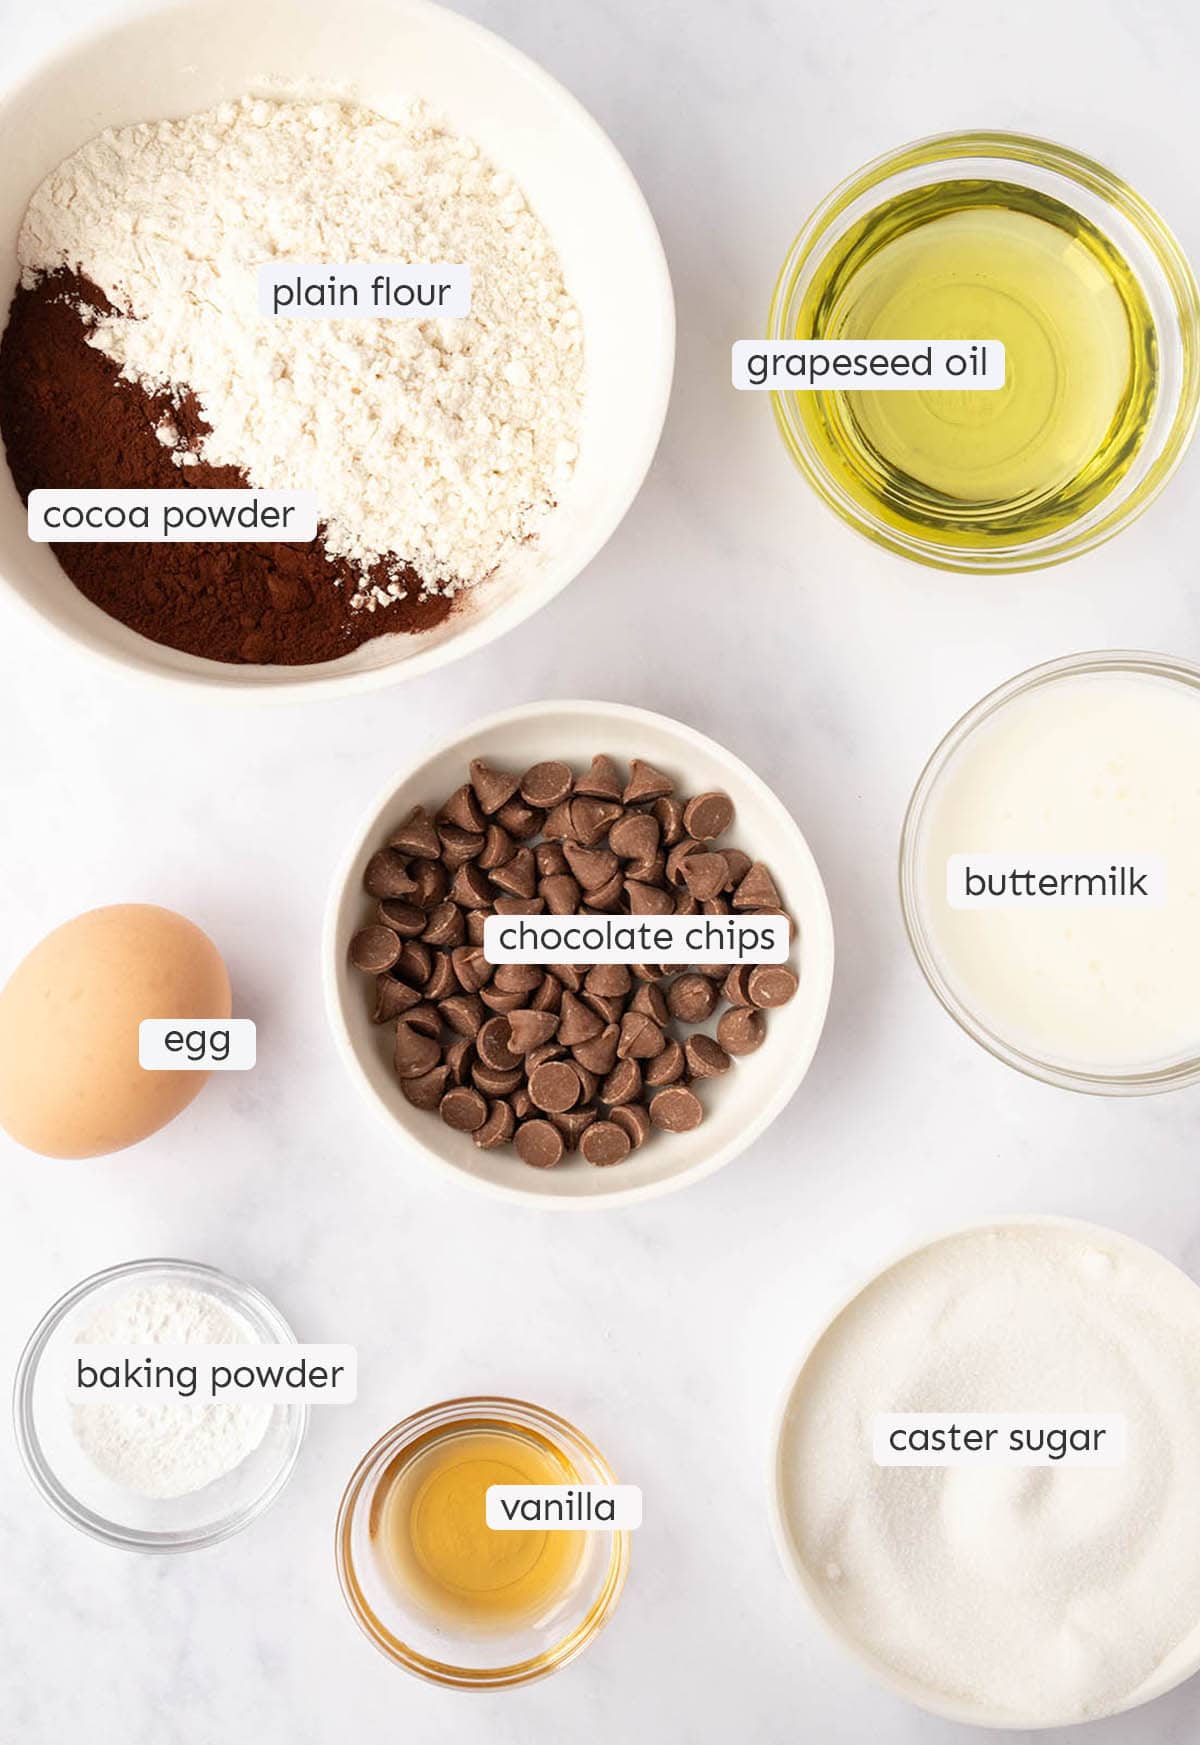 Top view of all the ingredients measured out to make Small Batch Chocolate Cupcakes.